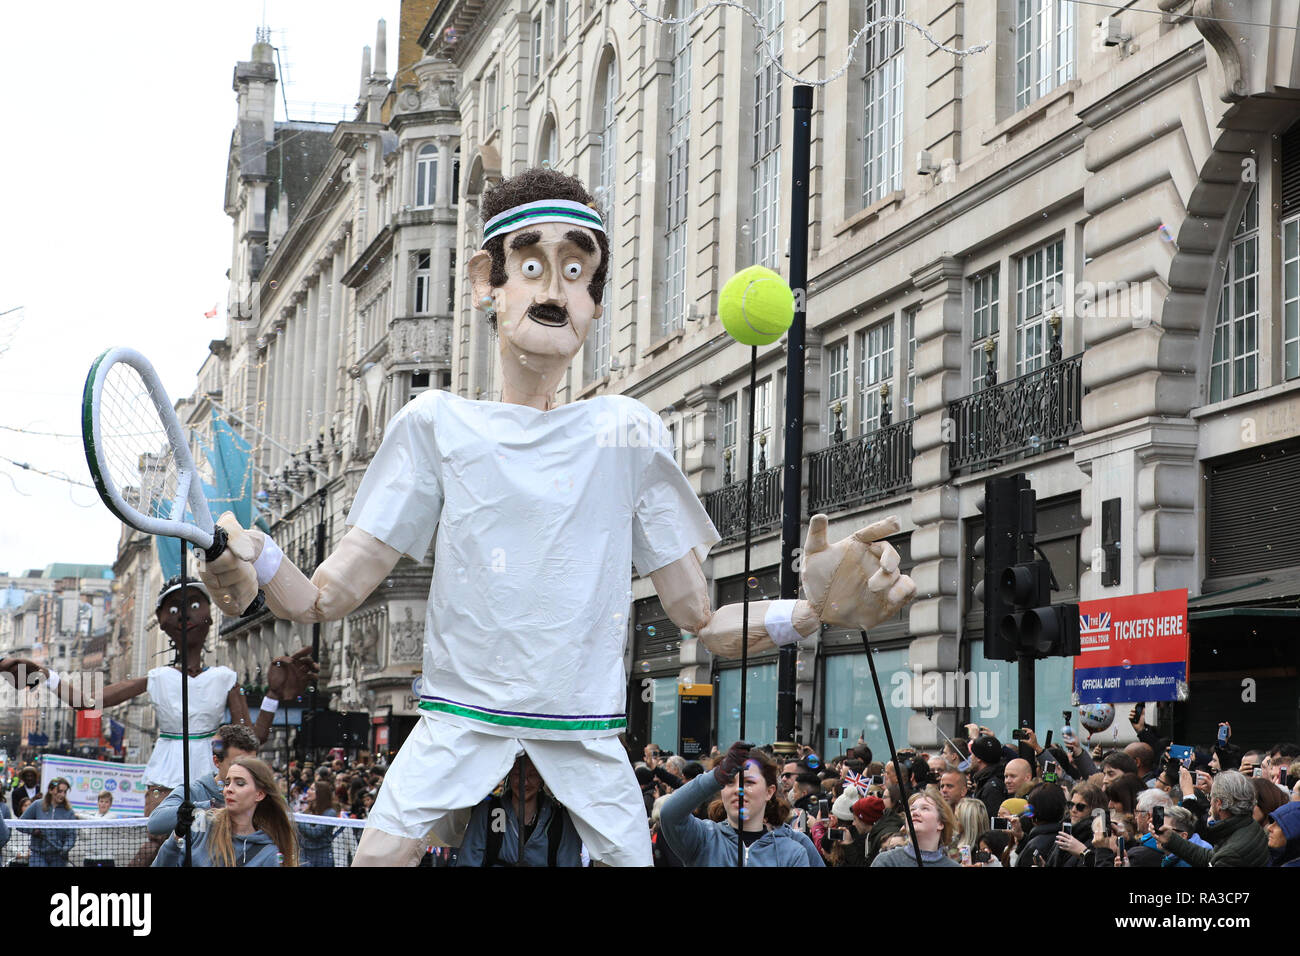 London, UK. UK. 01st Jan, 2019. London, UK. 1st Jan 2019. The Borough of  Merton's float features giant Wimbledon tennis players in action. London's  New Year's Day Parade 2019, or LNYDP, features